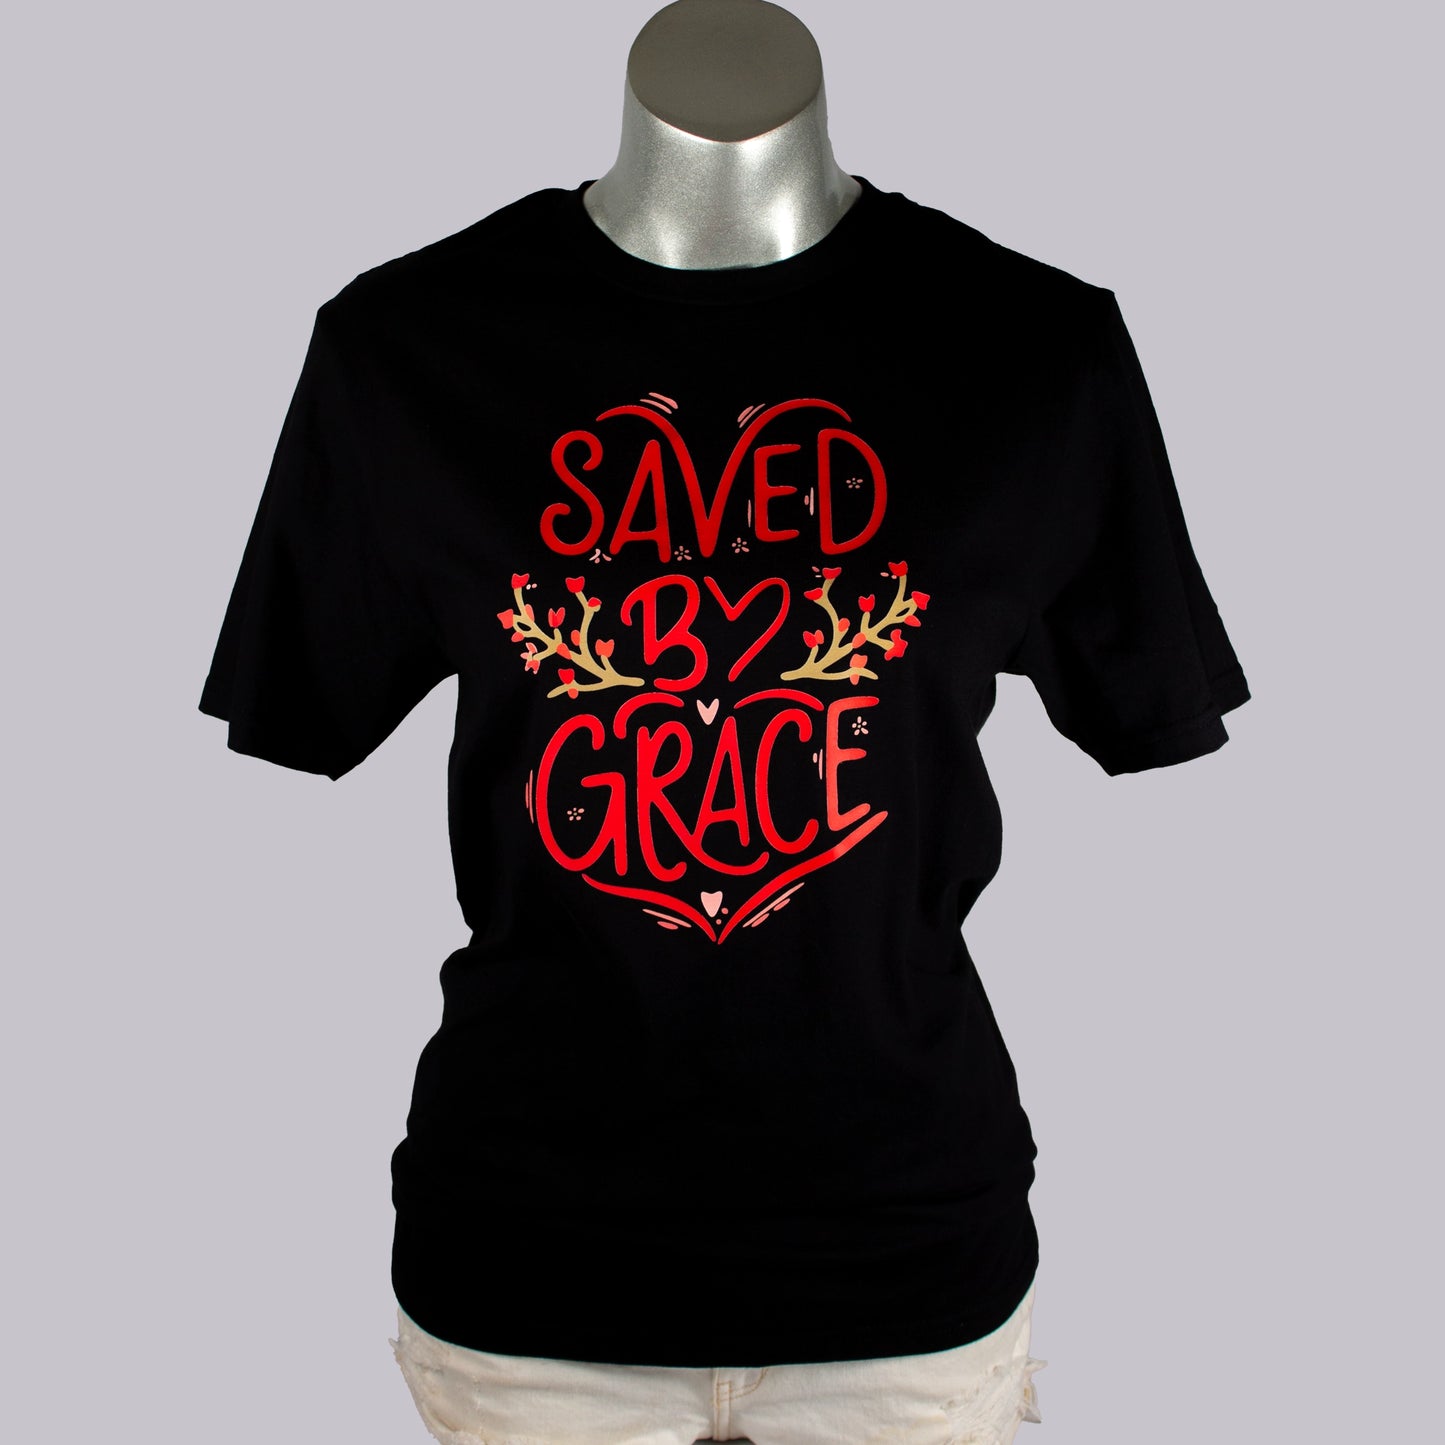 Saved by Grace Unisex T-Shirt